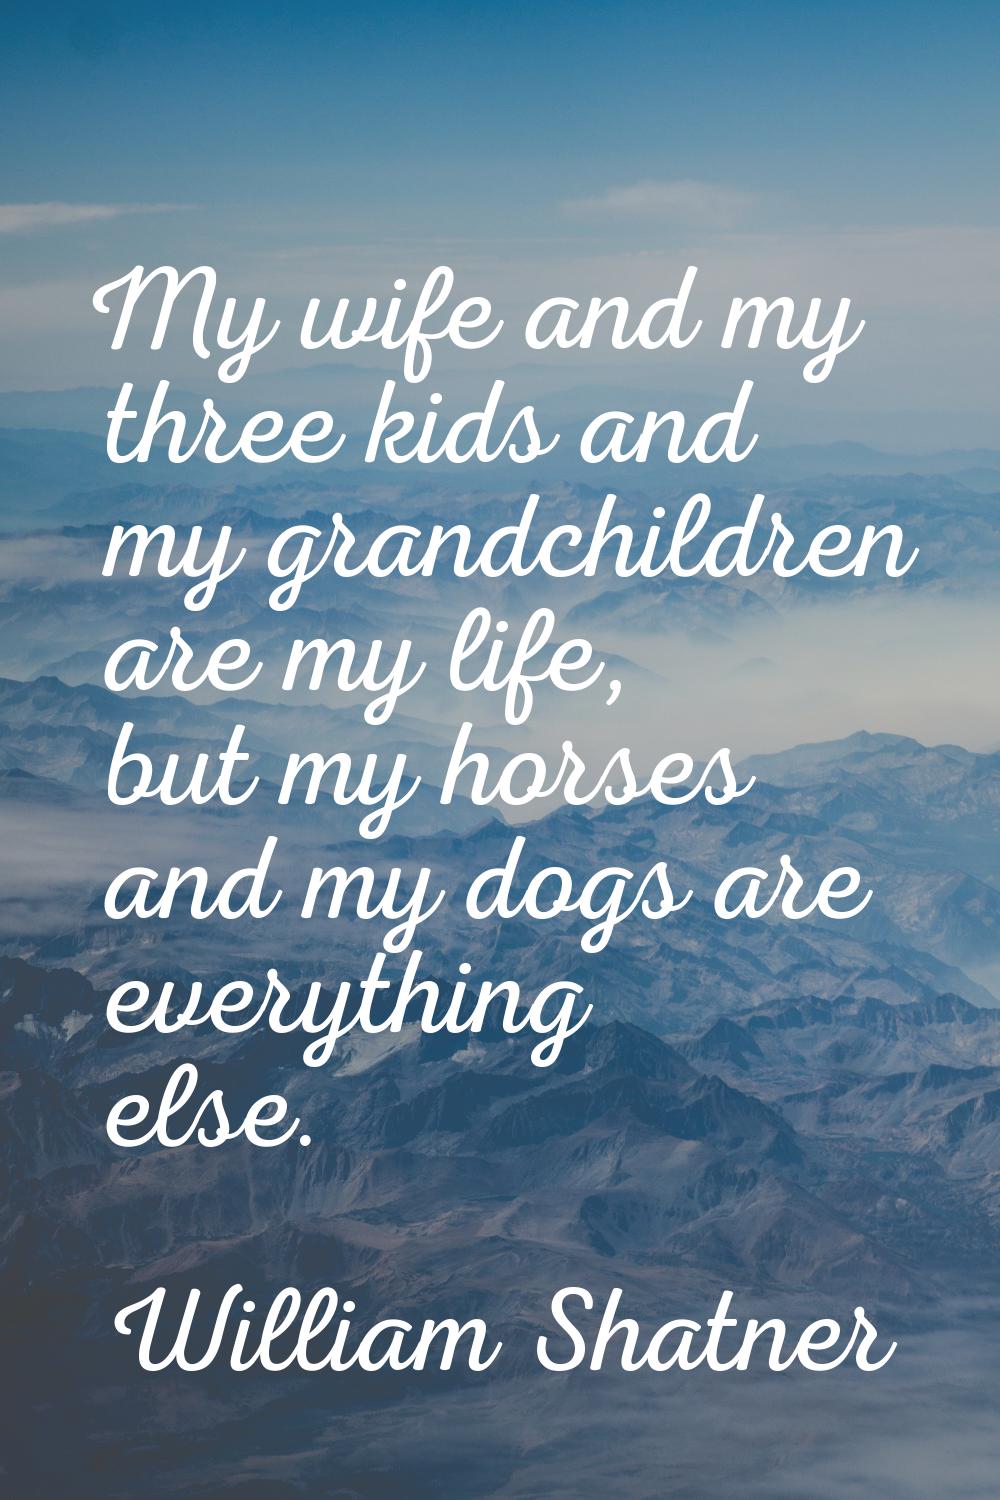 My wife and my three kids and my grandchildren are my life, but my horses and my dogs are everythin